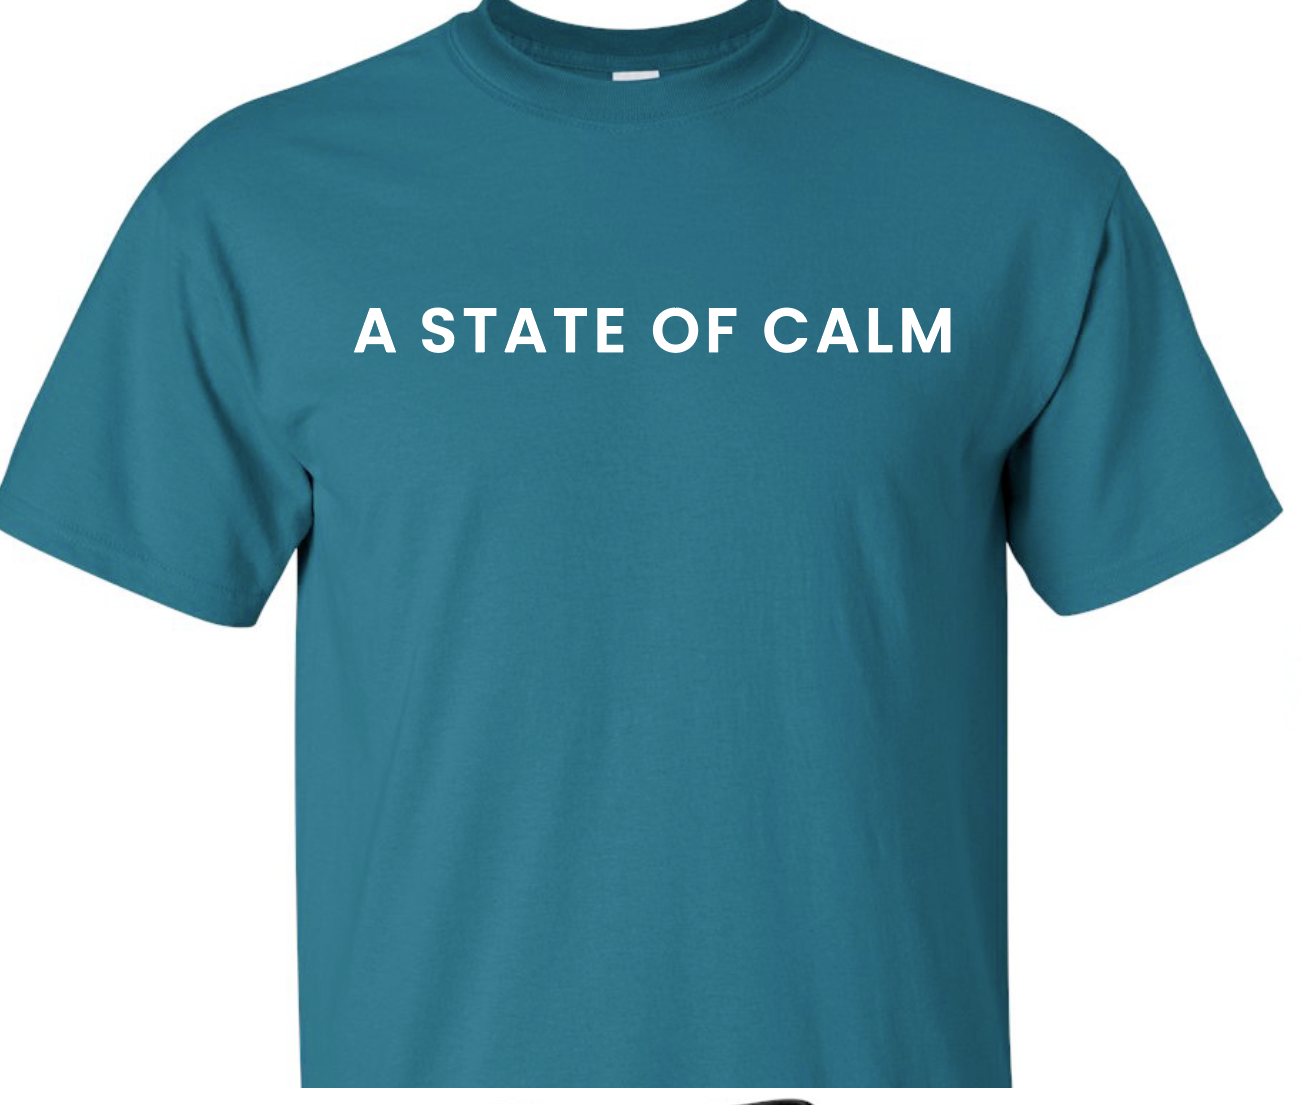 
  
  A STATE OF CALM TEES WITH WORDS ACROSS THE CHEST
  
